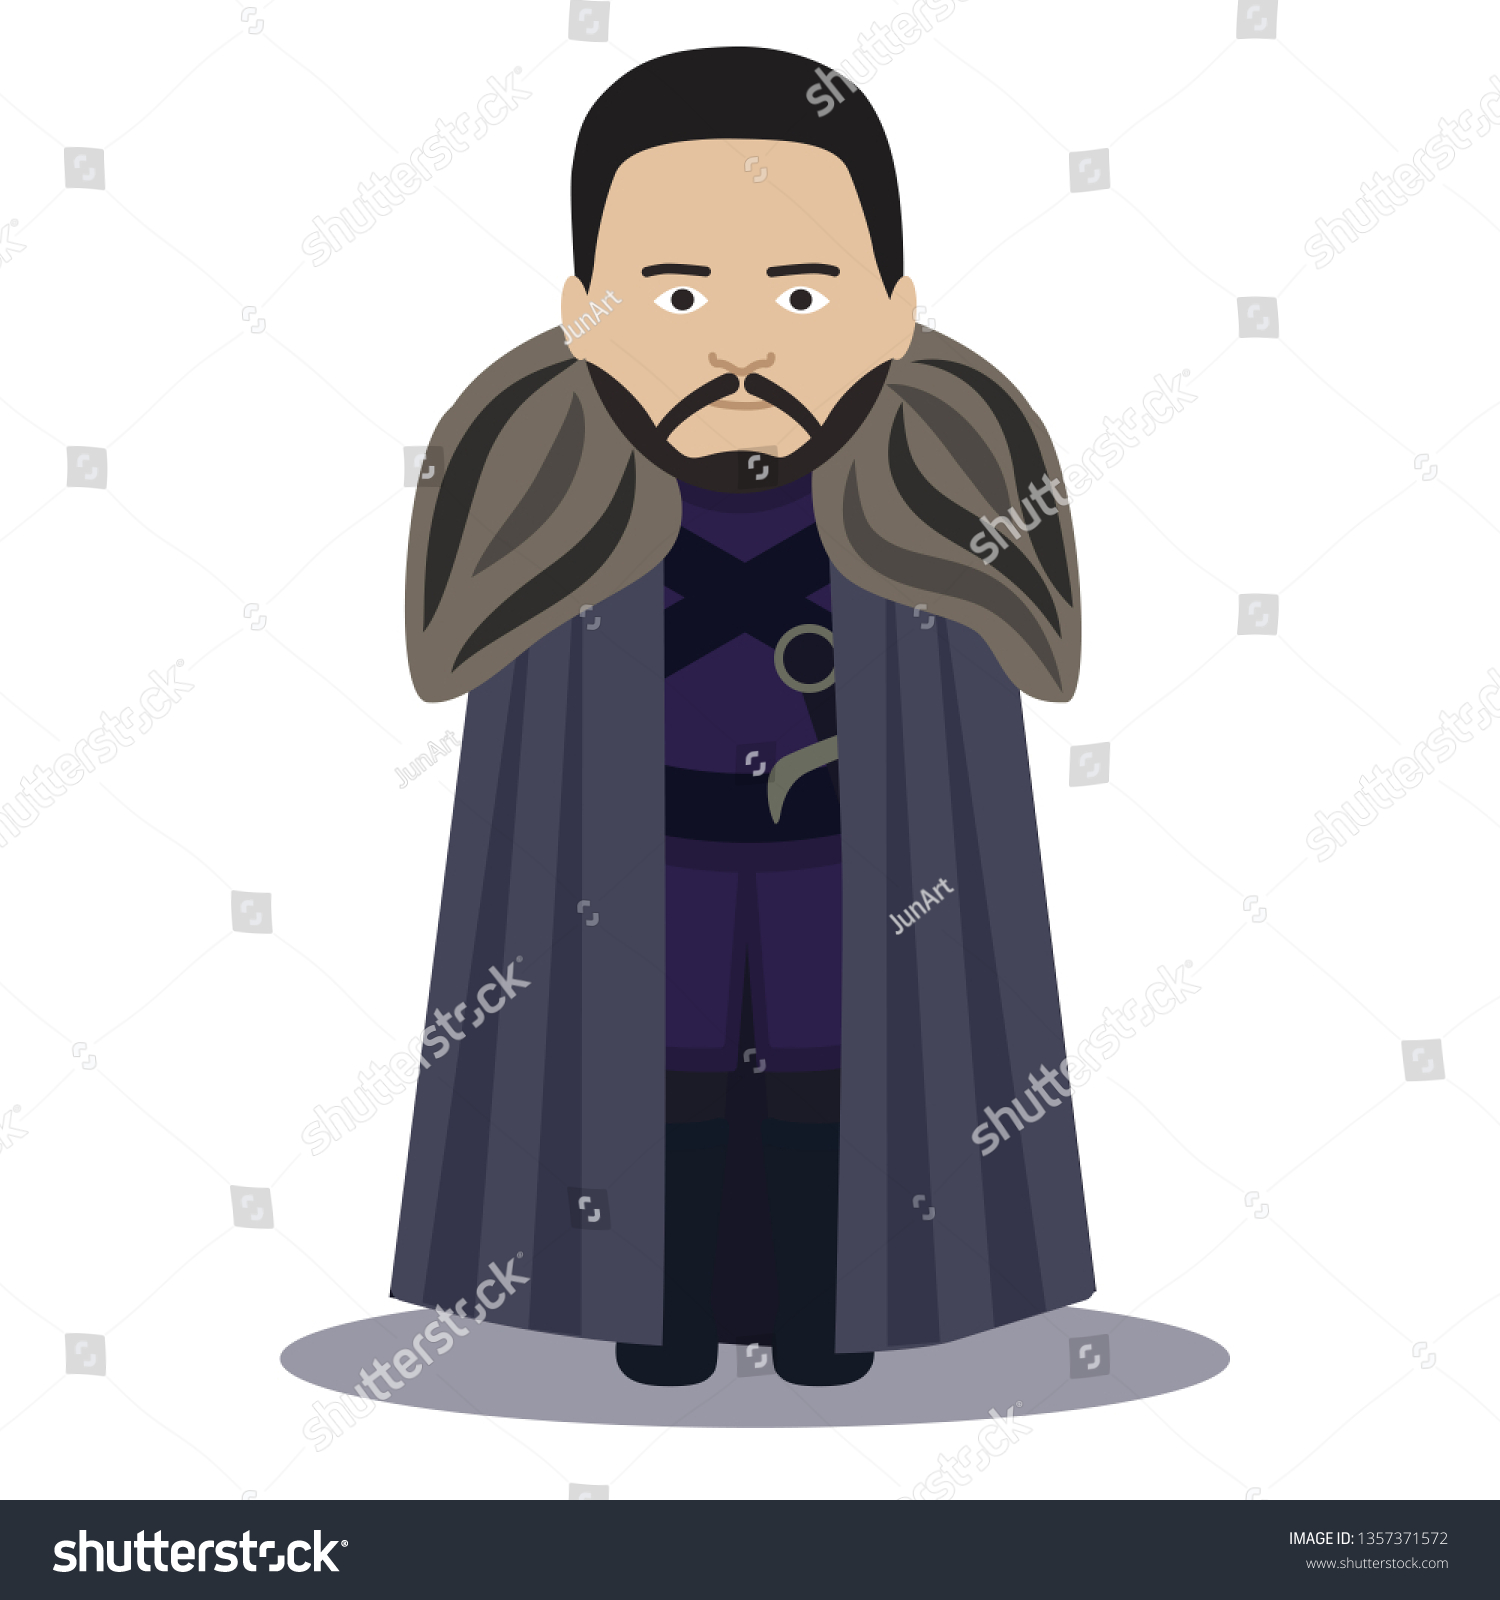 SVG of Knight with a sword character illustration svg